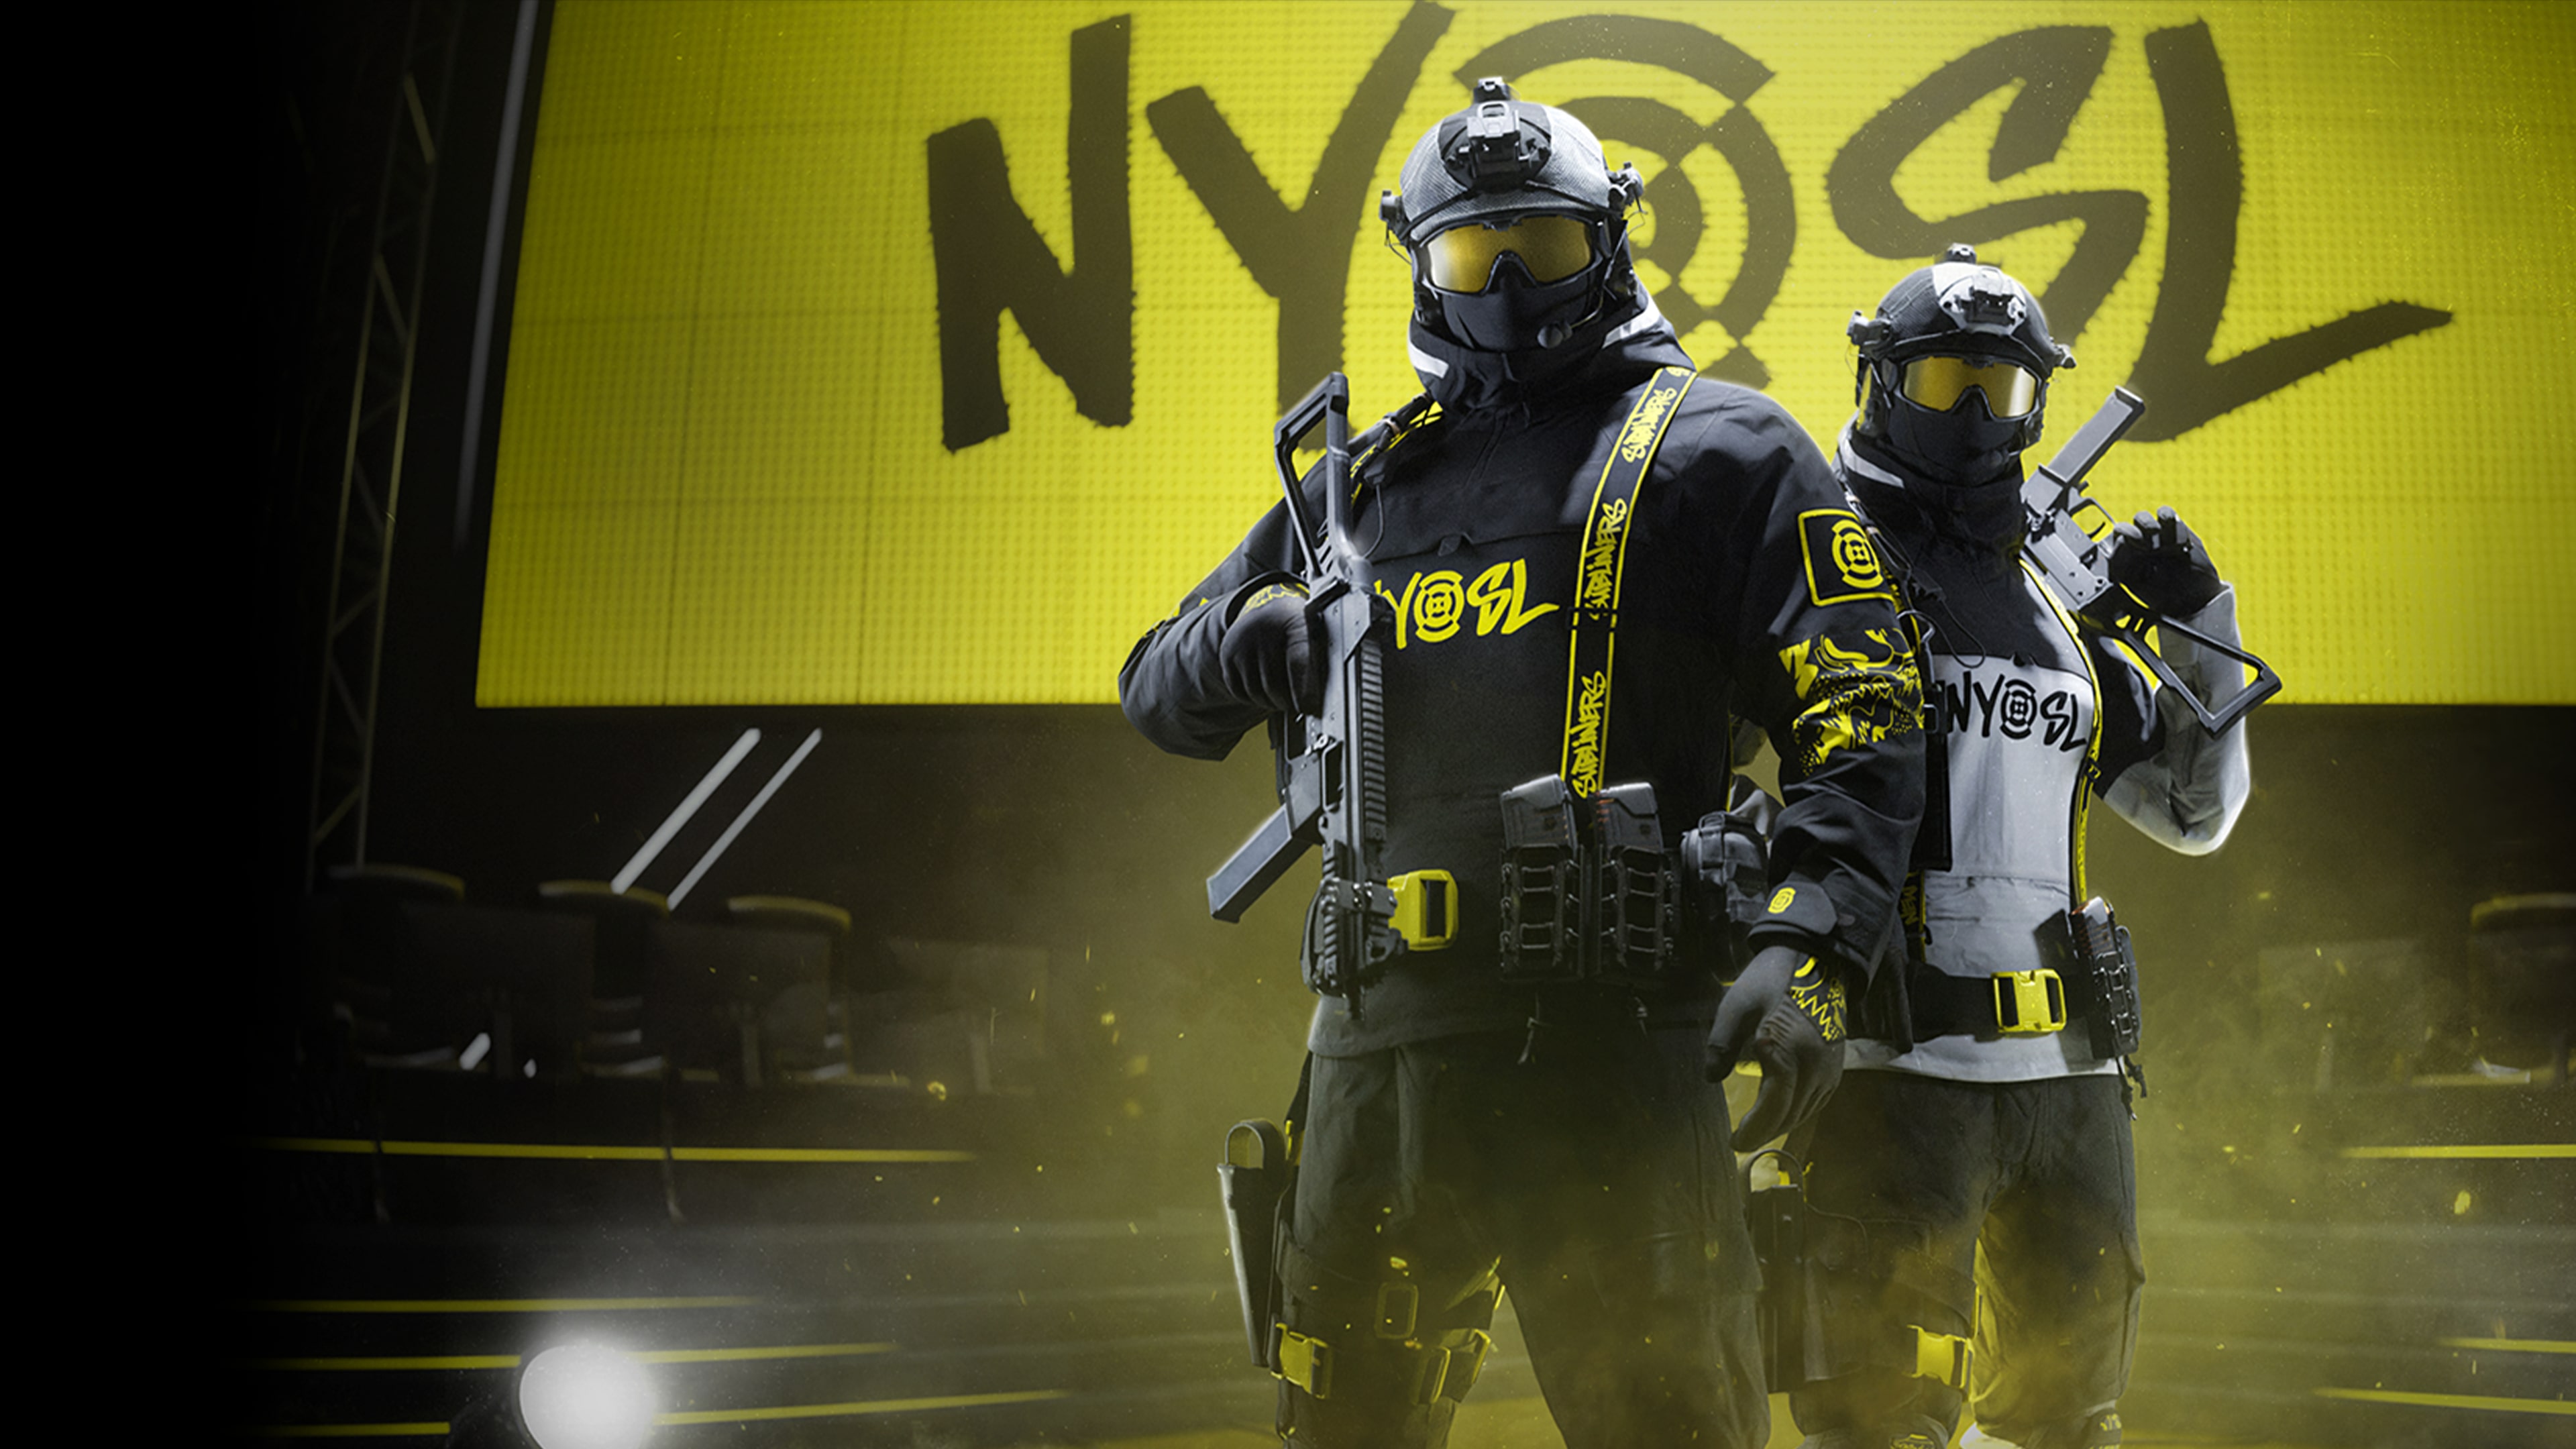 Call of Duty League™ - Pack d'équipe New York Subliners 2024